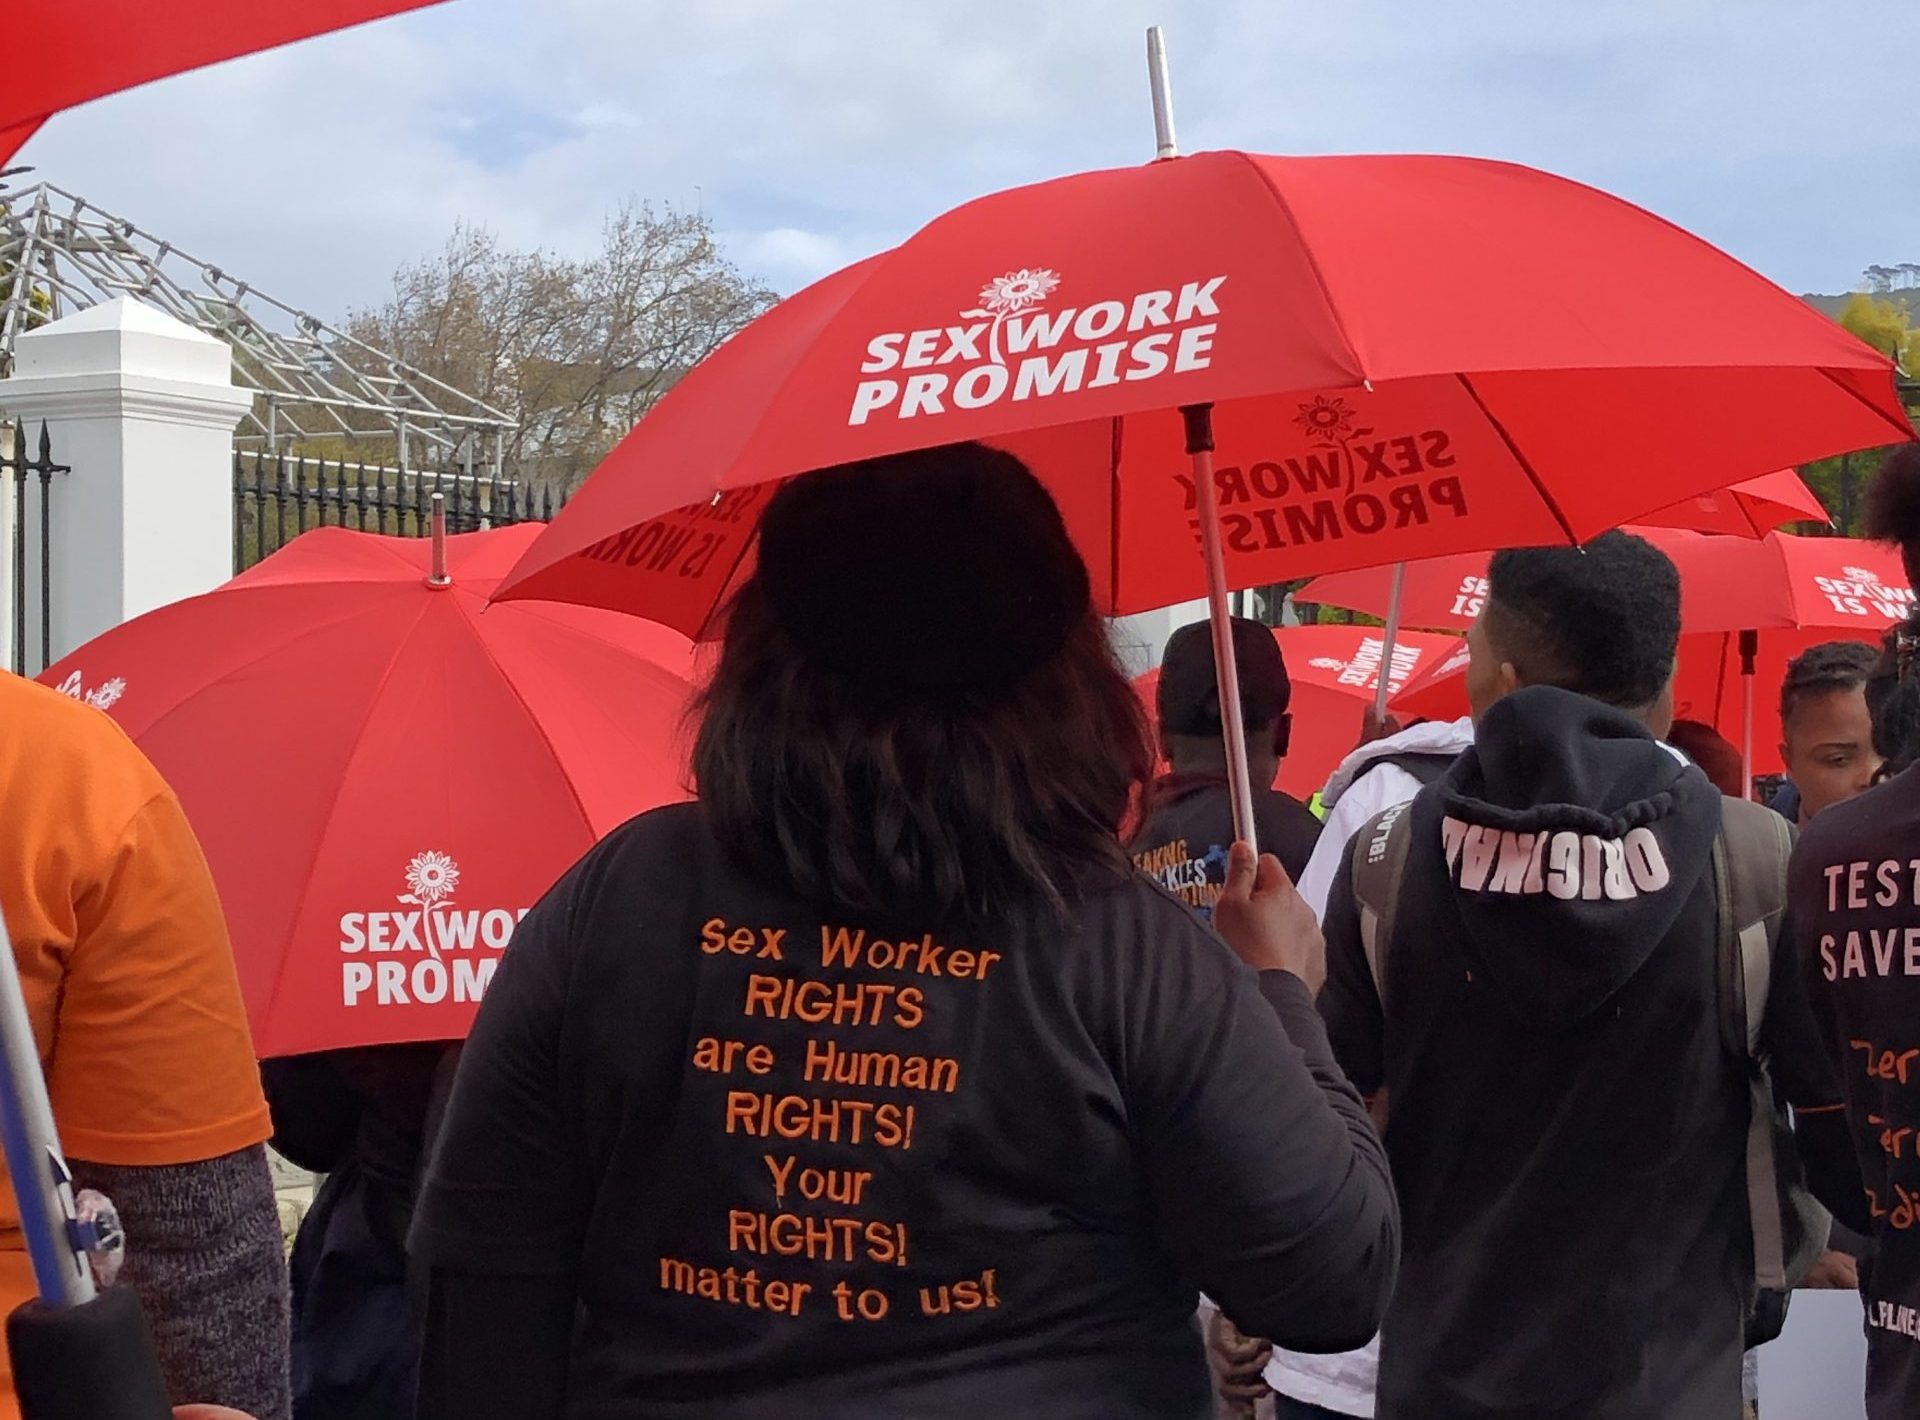 Sex Worker Rights are Human Rights